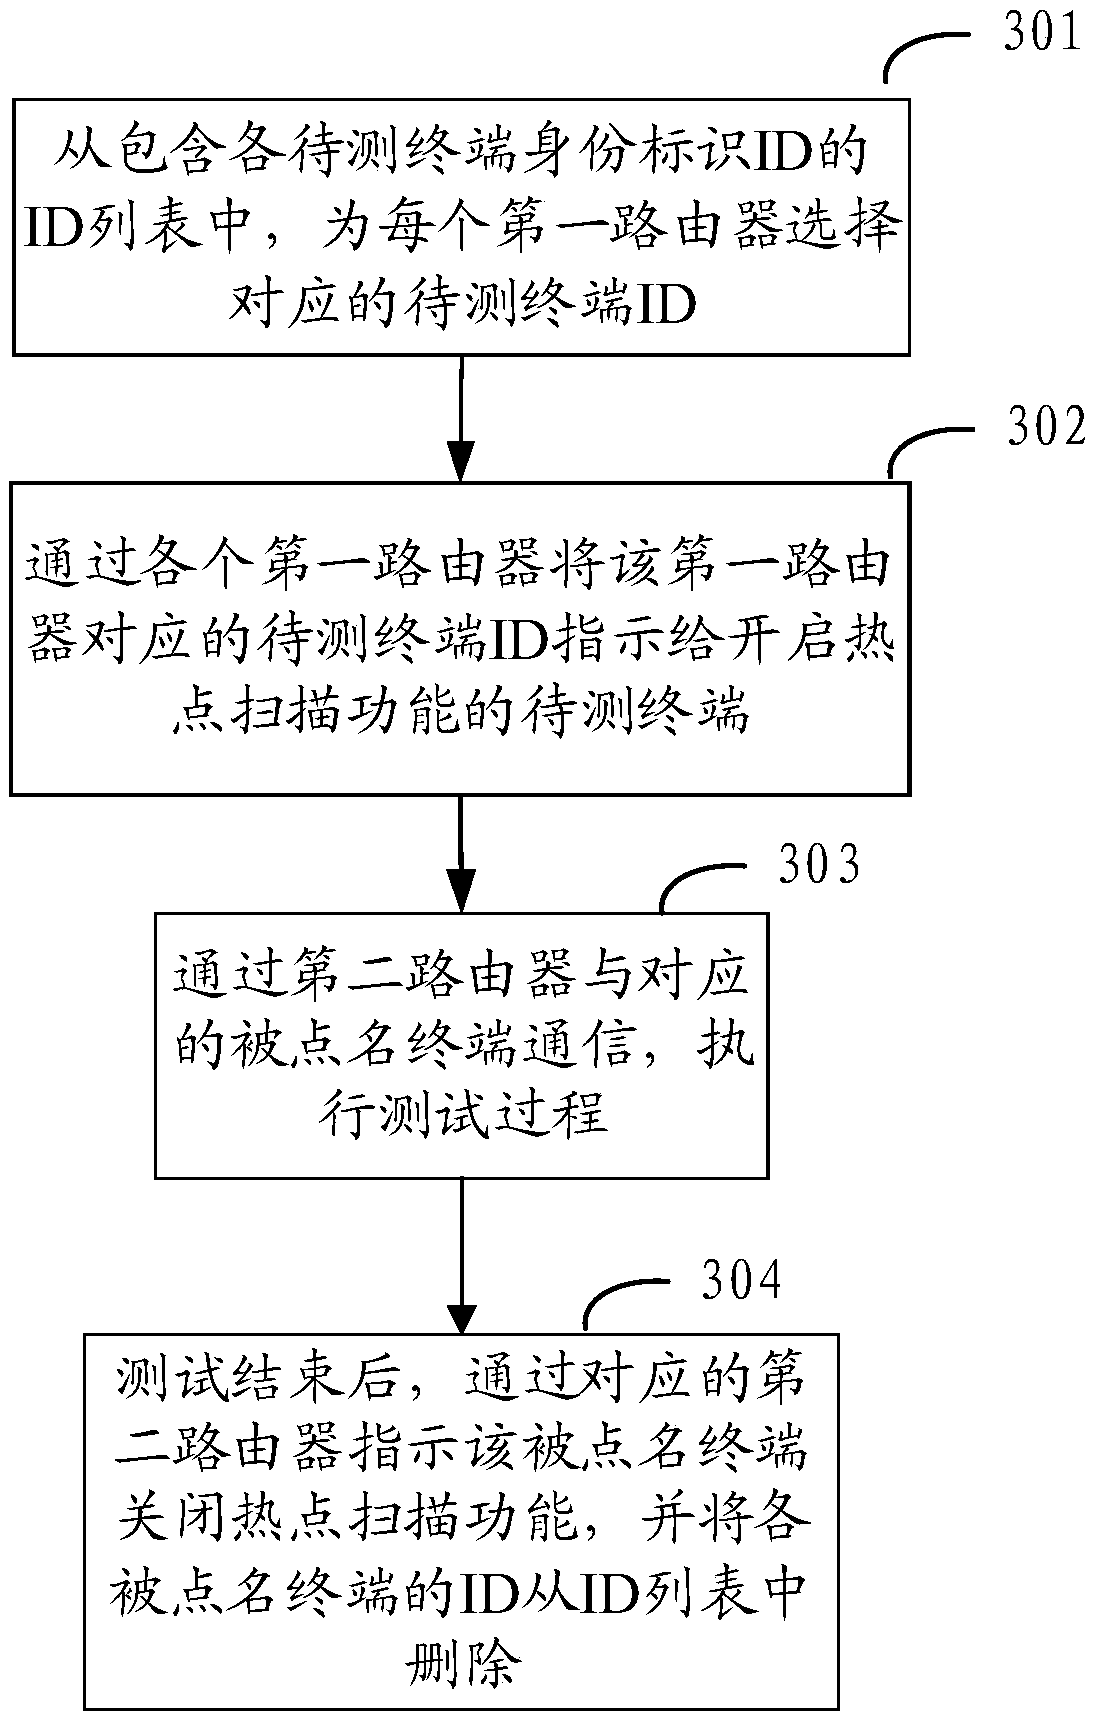 Method, device and system for achieving terminal testing in batches